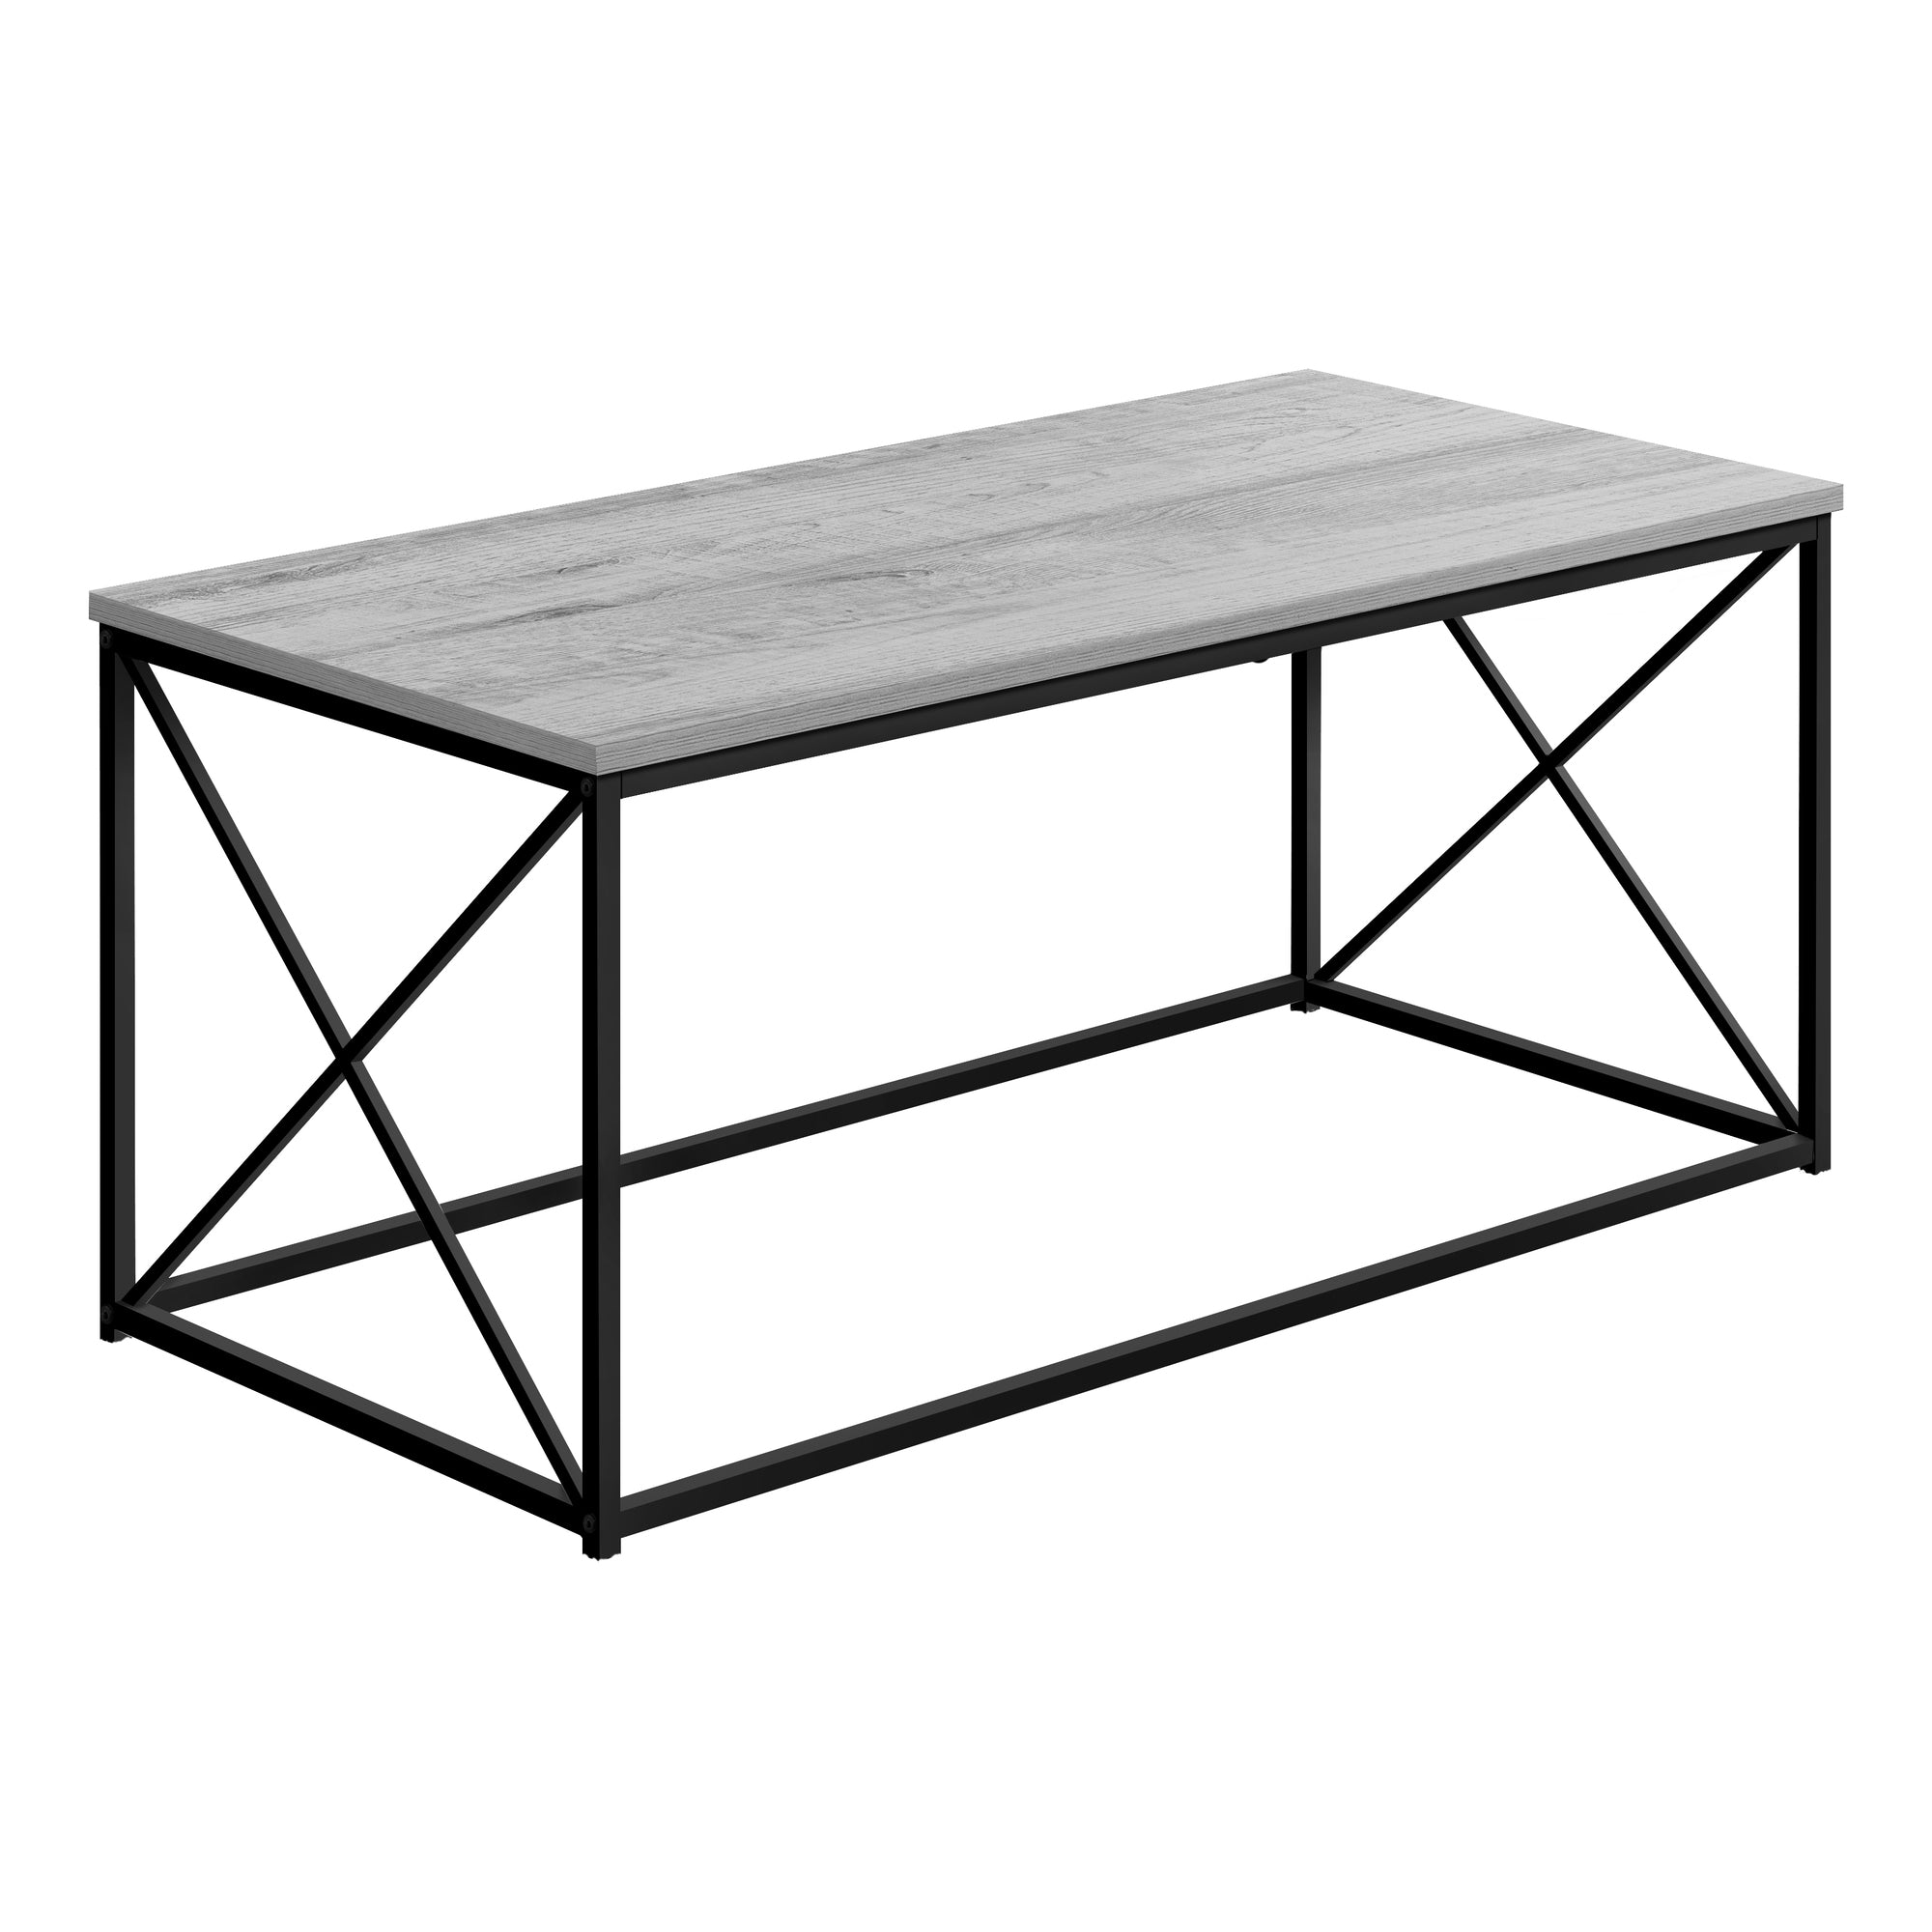 MN-553782    Coffee Table - Rectangular / Metal Base With X-Shaped Sides - 40"L - Grey Wood-Look / Black